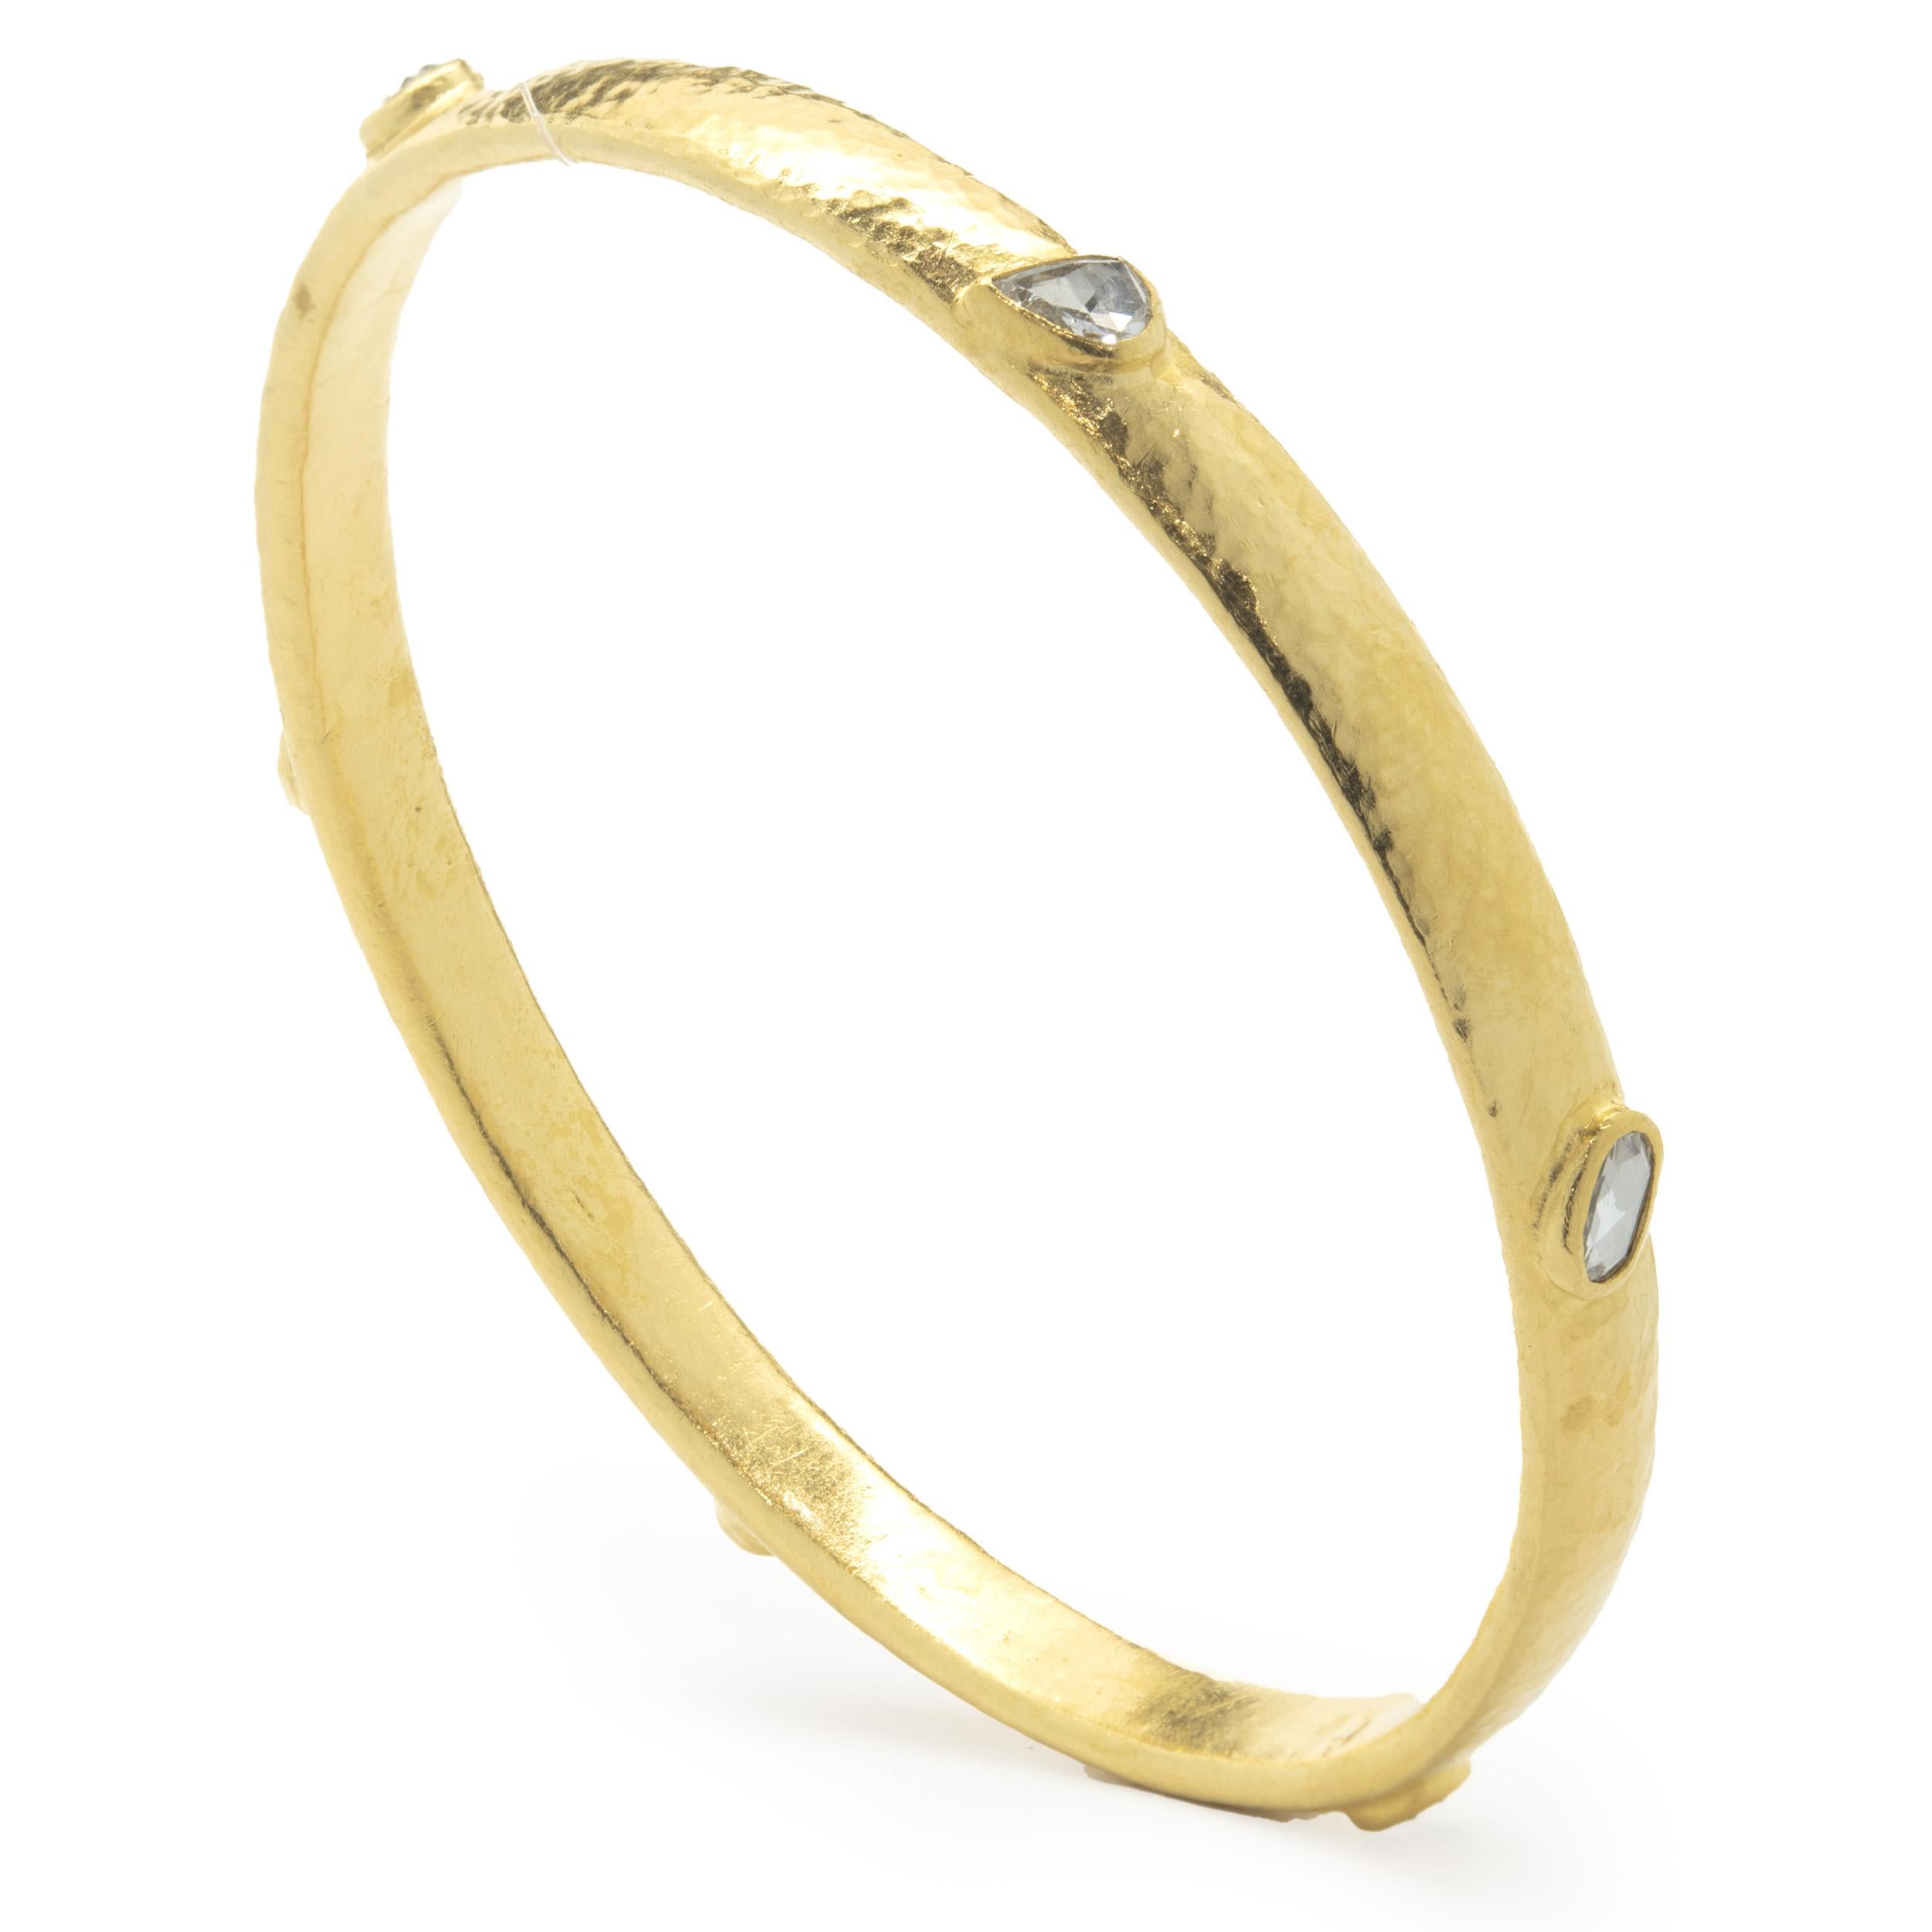 Designer: Gurhan
Material: 24K yellow gold
Diamond: multi cut = 1.25cttw
Color:  G
Clarity: SI2
Measurement: bracelet will fit up to a 7-inch wrist
Weight: 23.38 grams